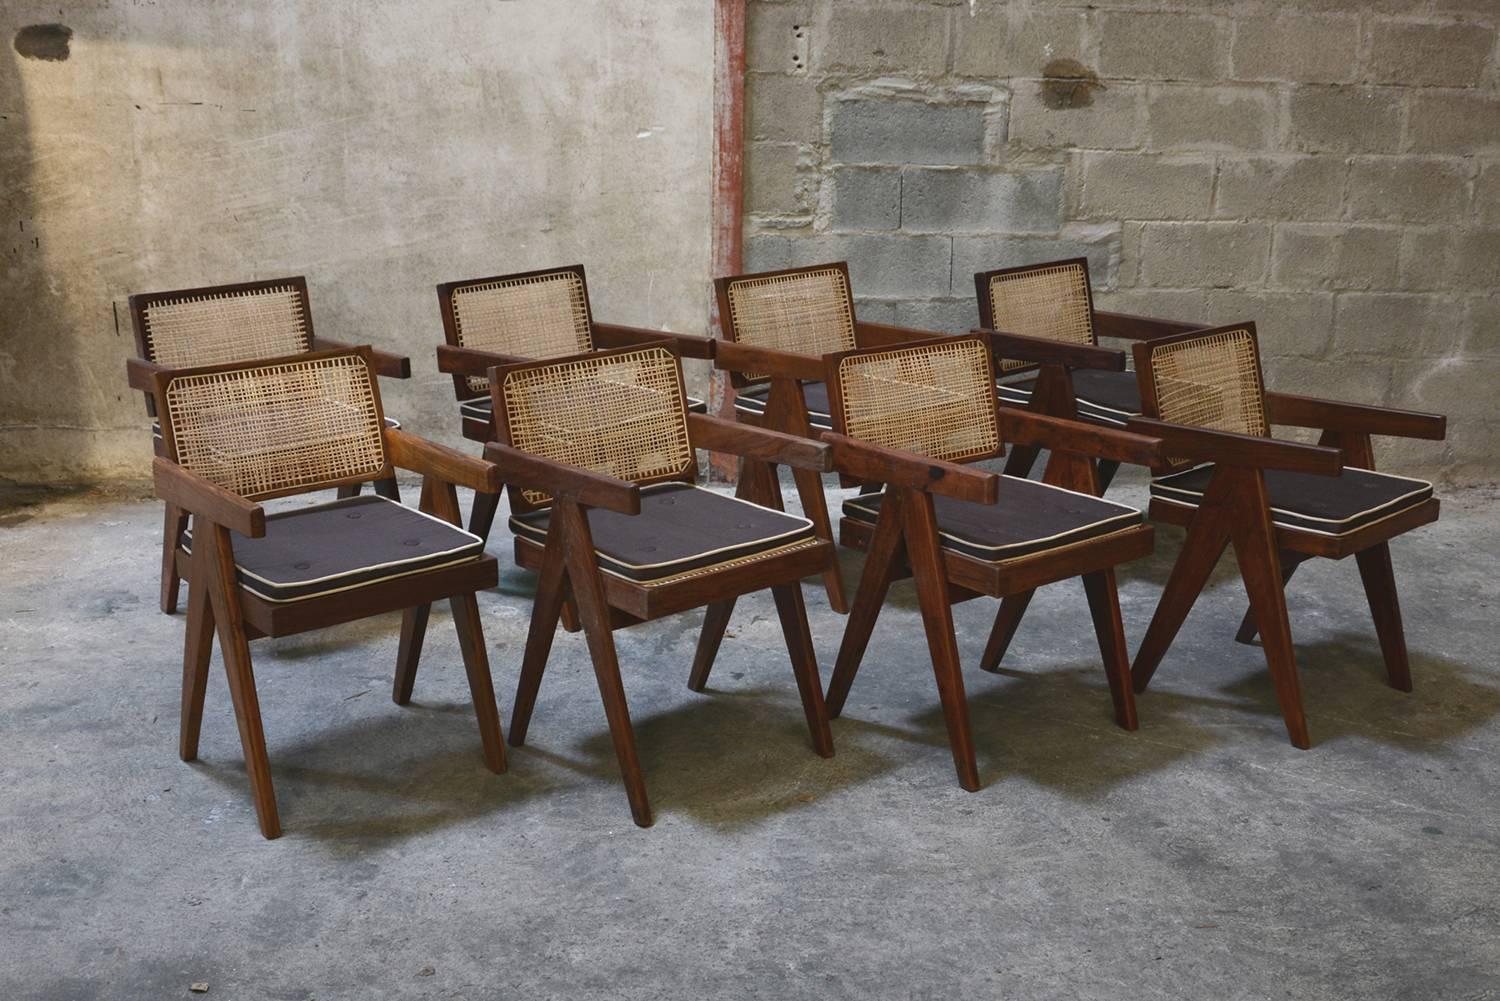 Pierre Jeanneret, very rare set of eight cane and teakwood office armchairs from administrative buildings in Chandigarh, India. Version with back separated from the seat. Teak, woven cane and upholstered seat cushion featuring cloth covering. See